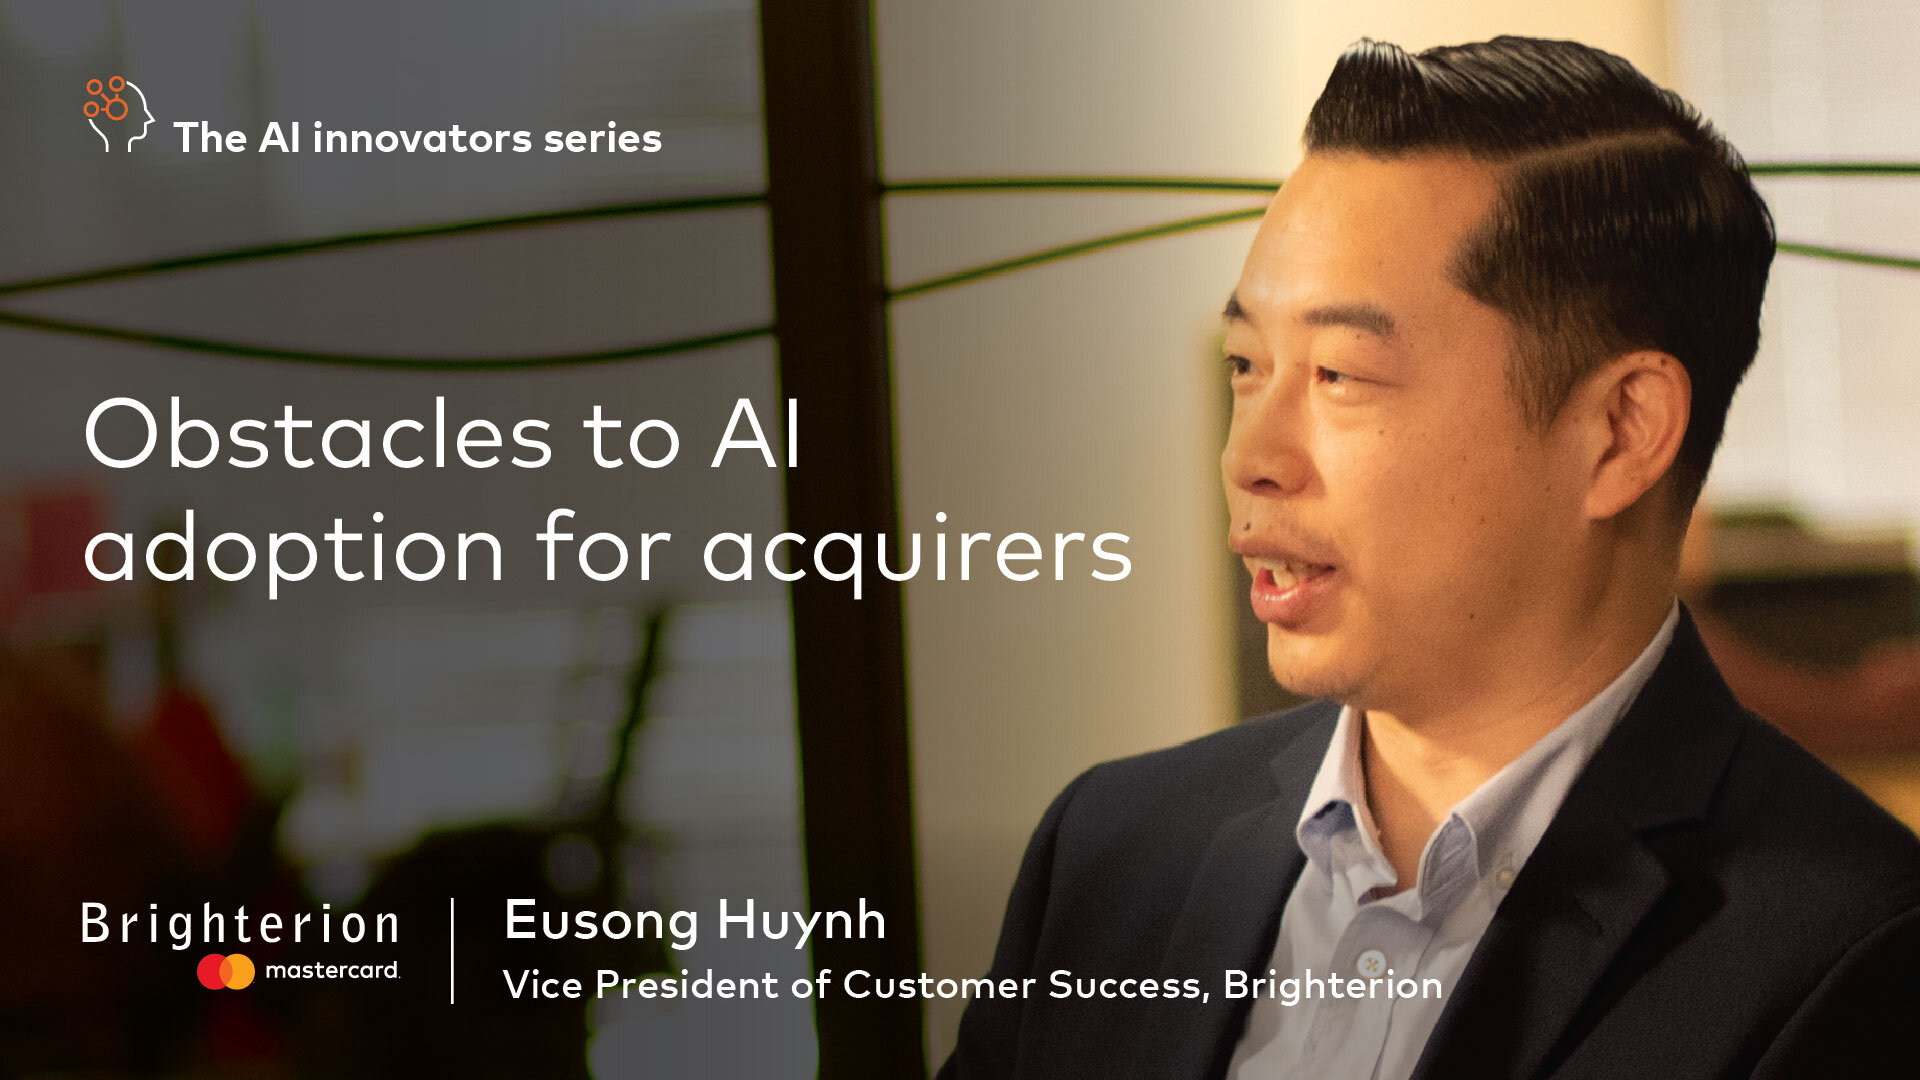 Obstacles to AI adoption for acquirers